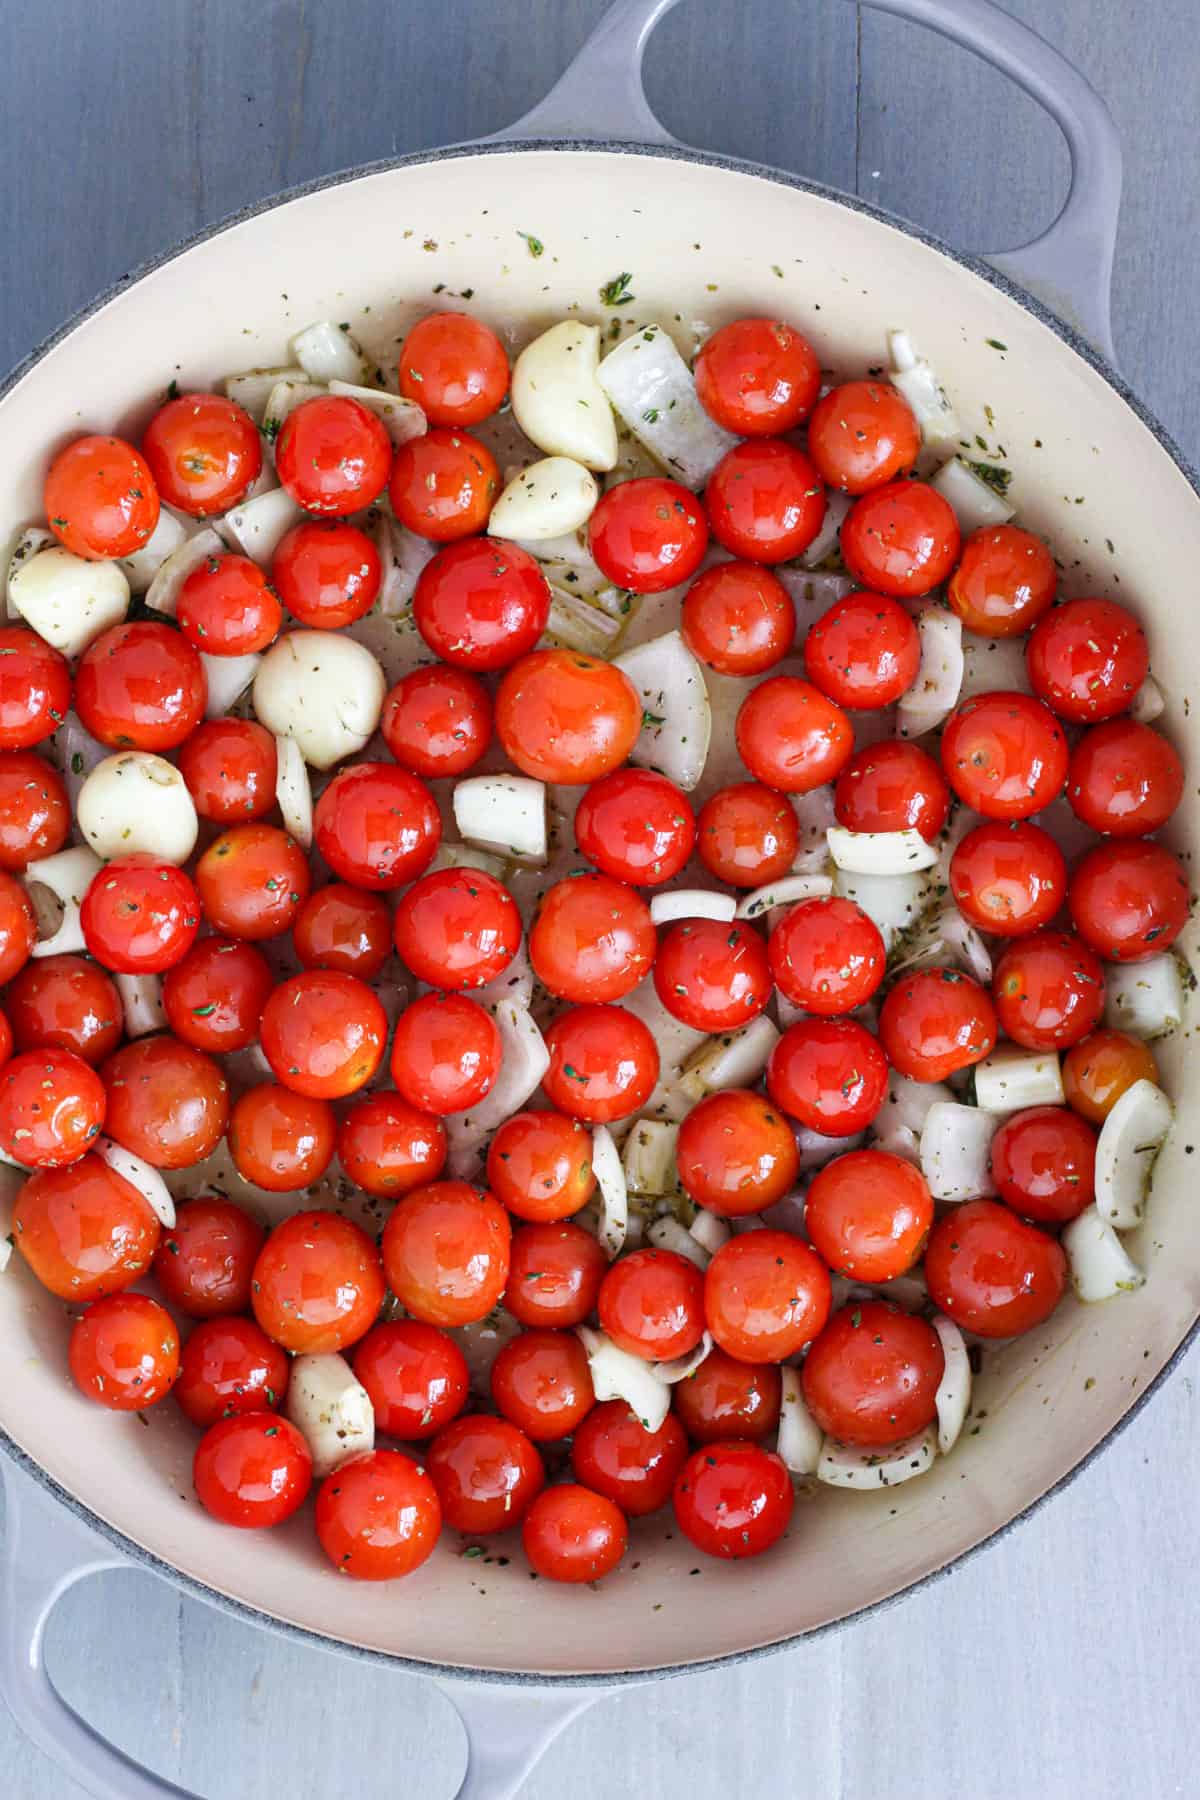 Cherry tomatoes, onions, garlic, herbs and oil in a skillet.